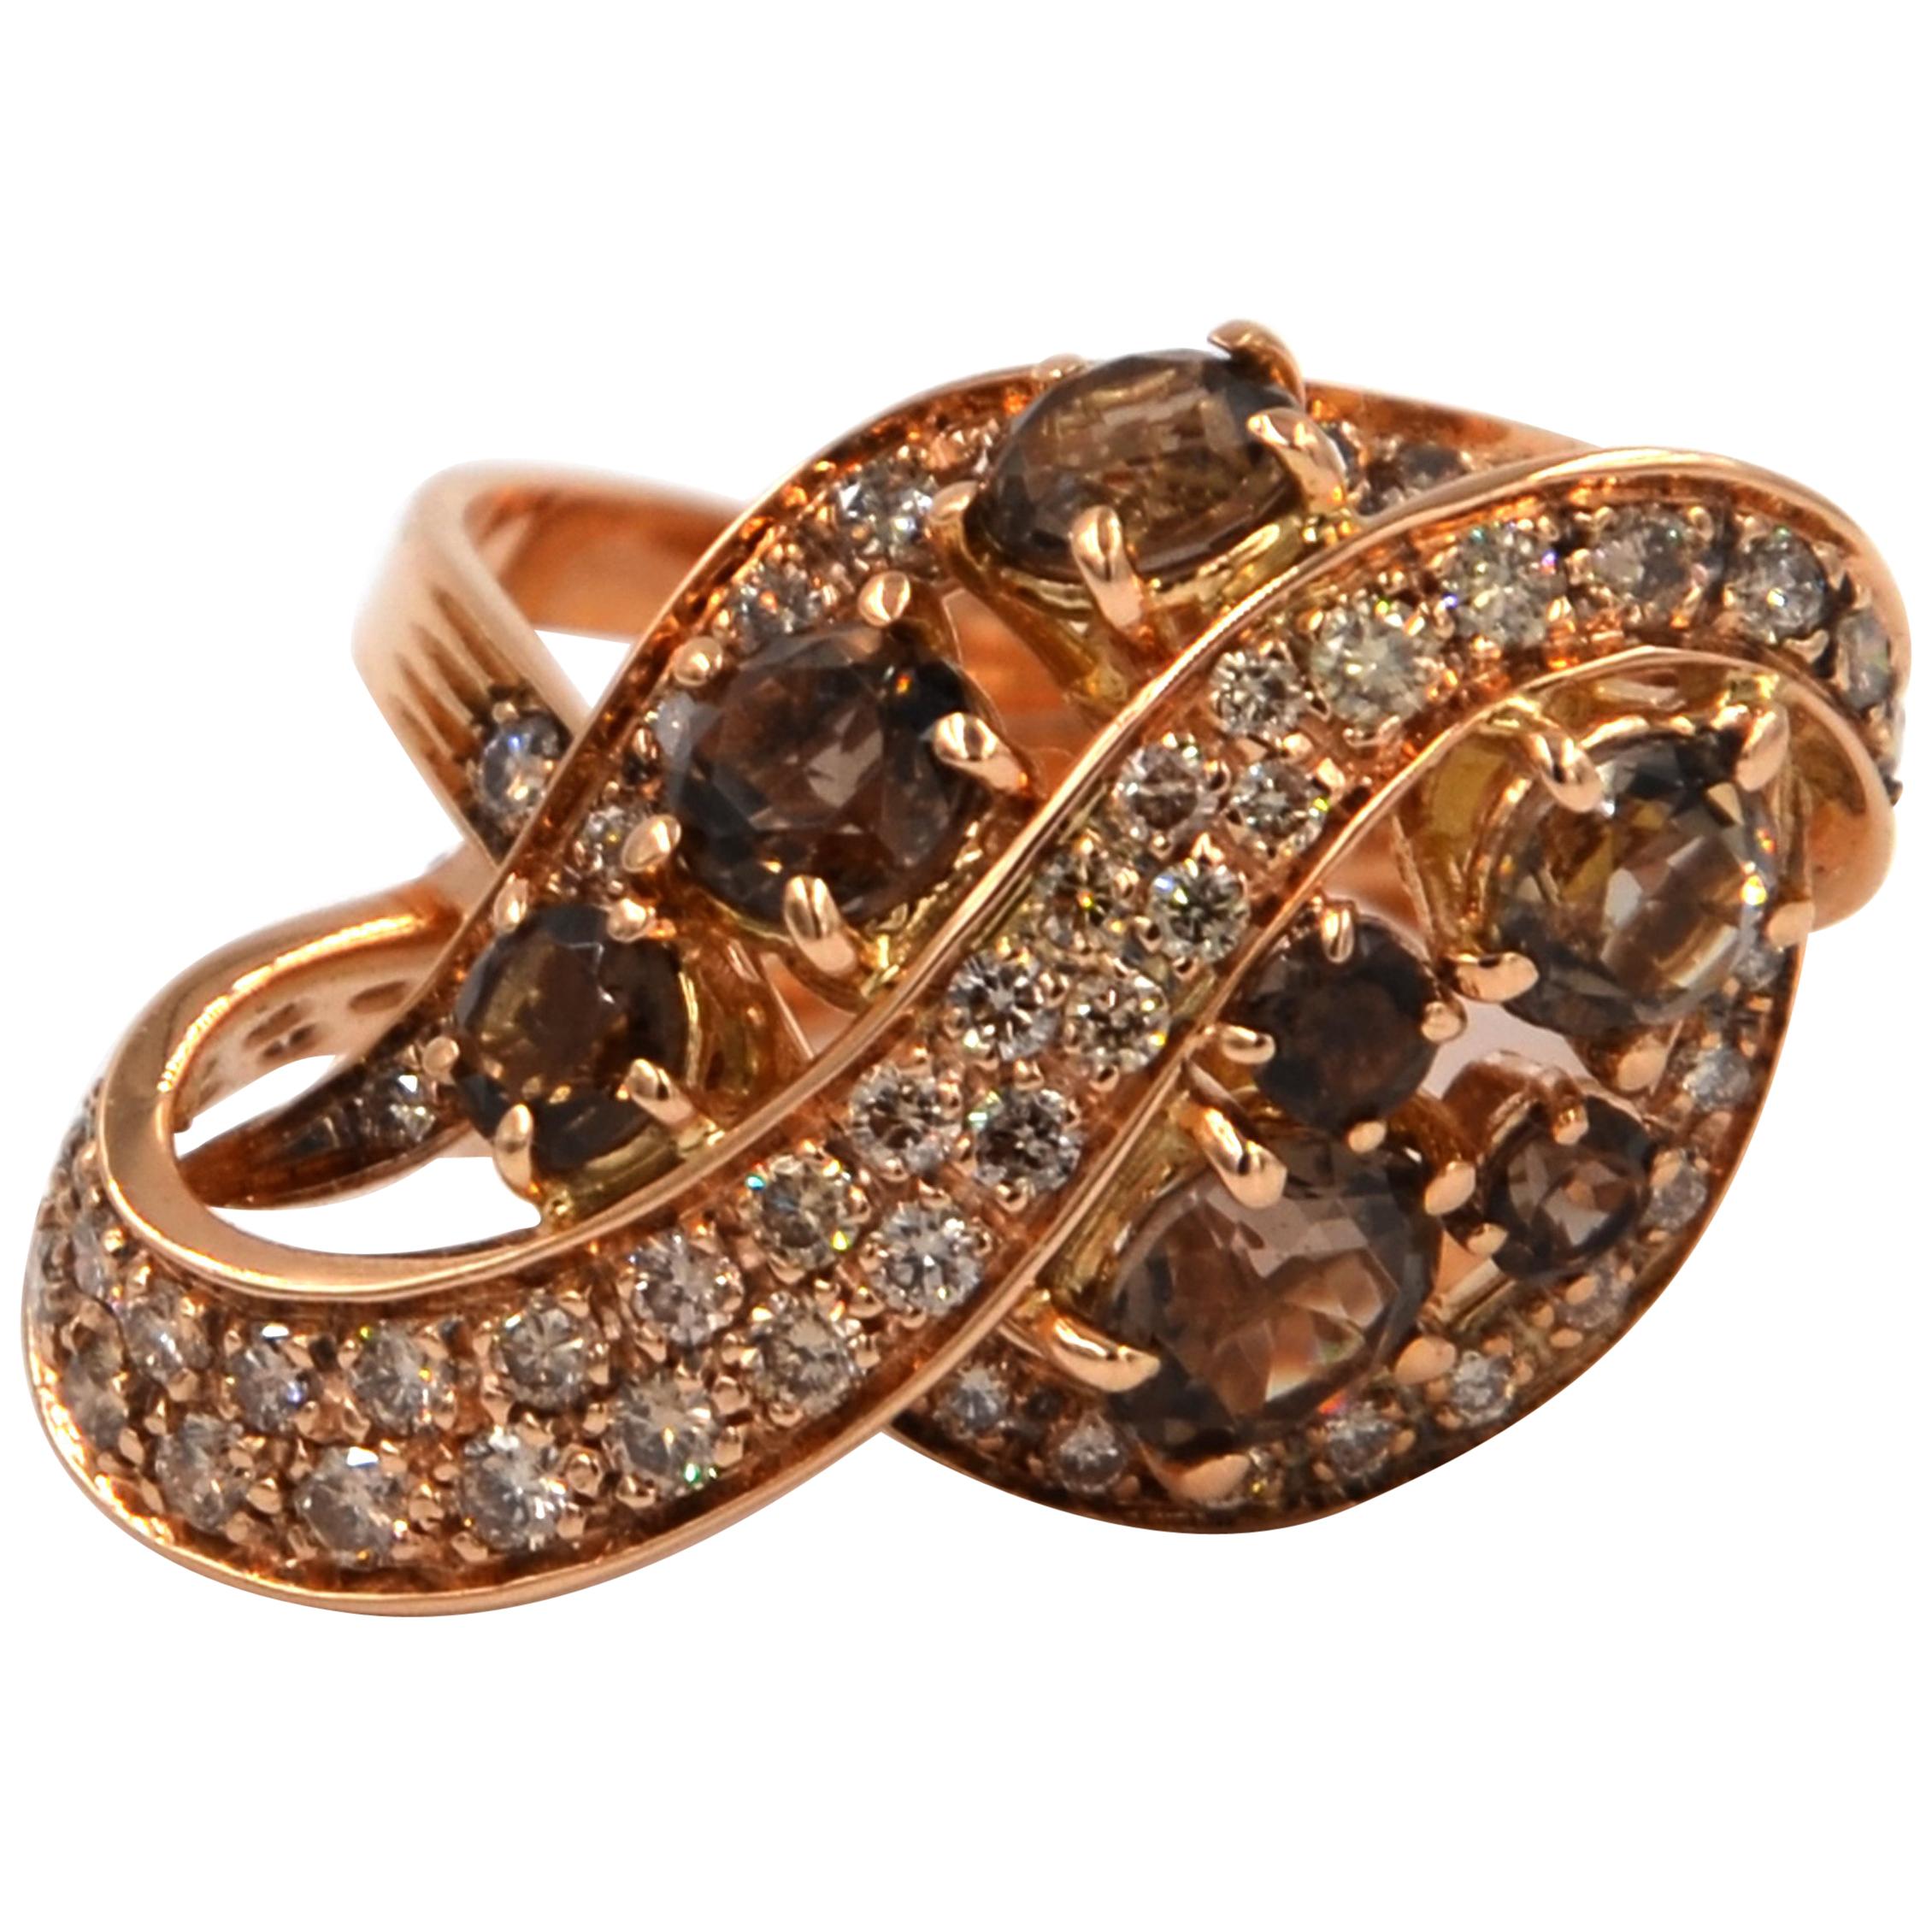 18KT Rose Gold brown diamonds and smoky quartz GARAVELLI  modern cocktail ring.
Finger size 52   Made in Italy, in Valenza.
18KT YELLOW GOLD  :GR 11.46
BROWN DIAMONDS ct : 1.70
SMOKY QUARTZ ct : 3.58